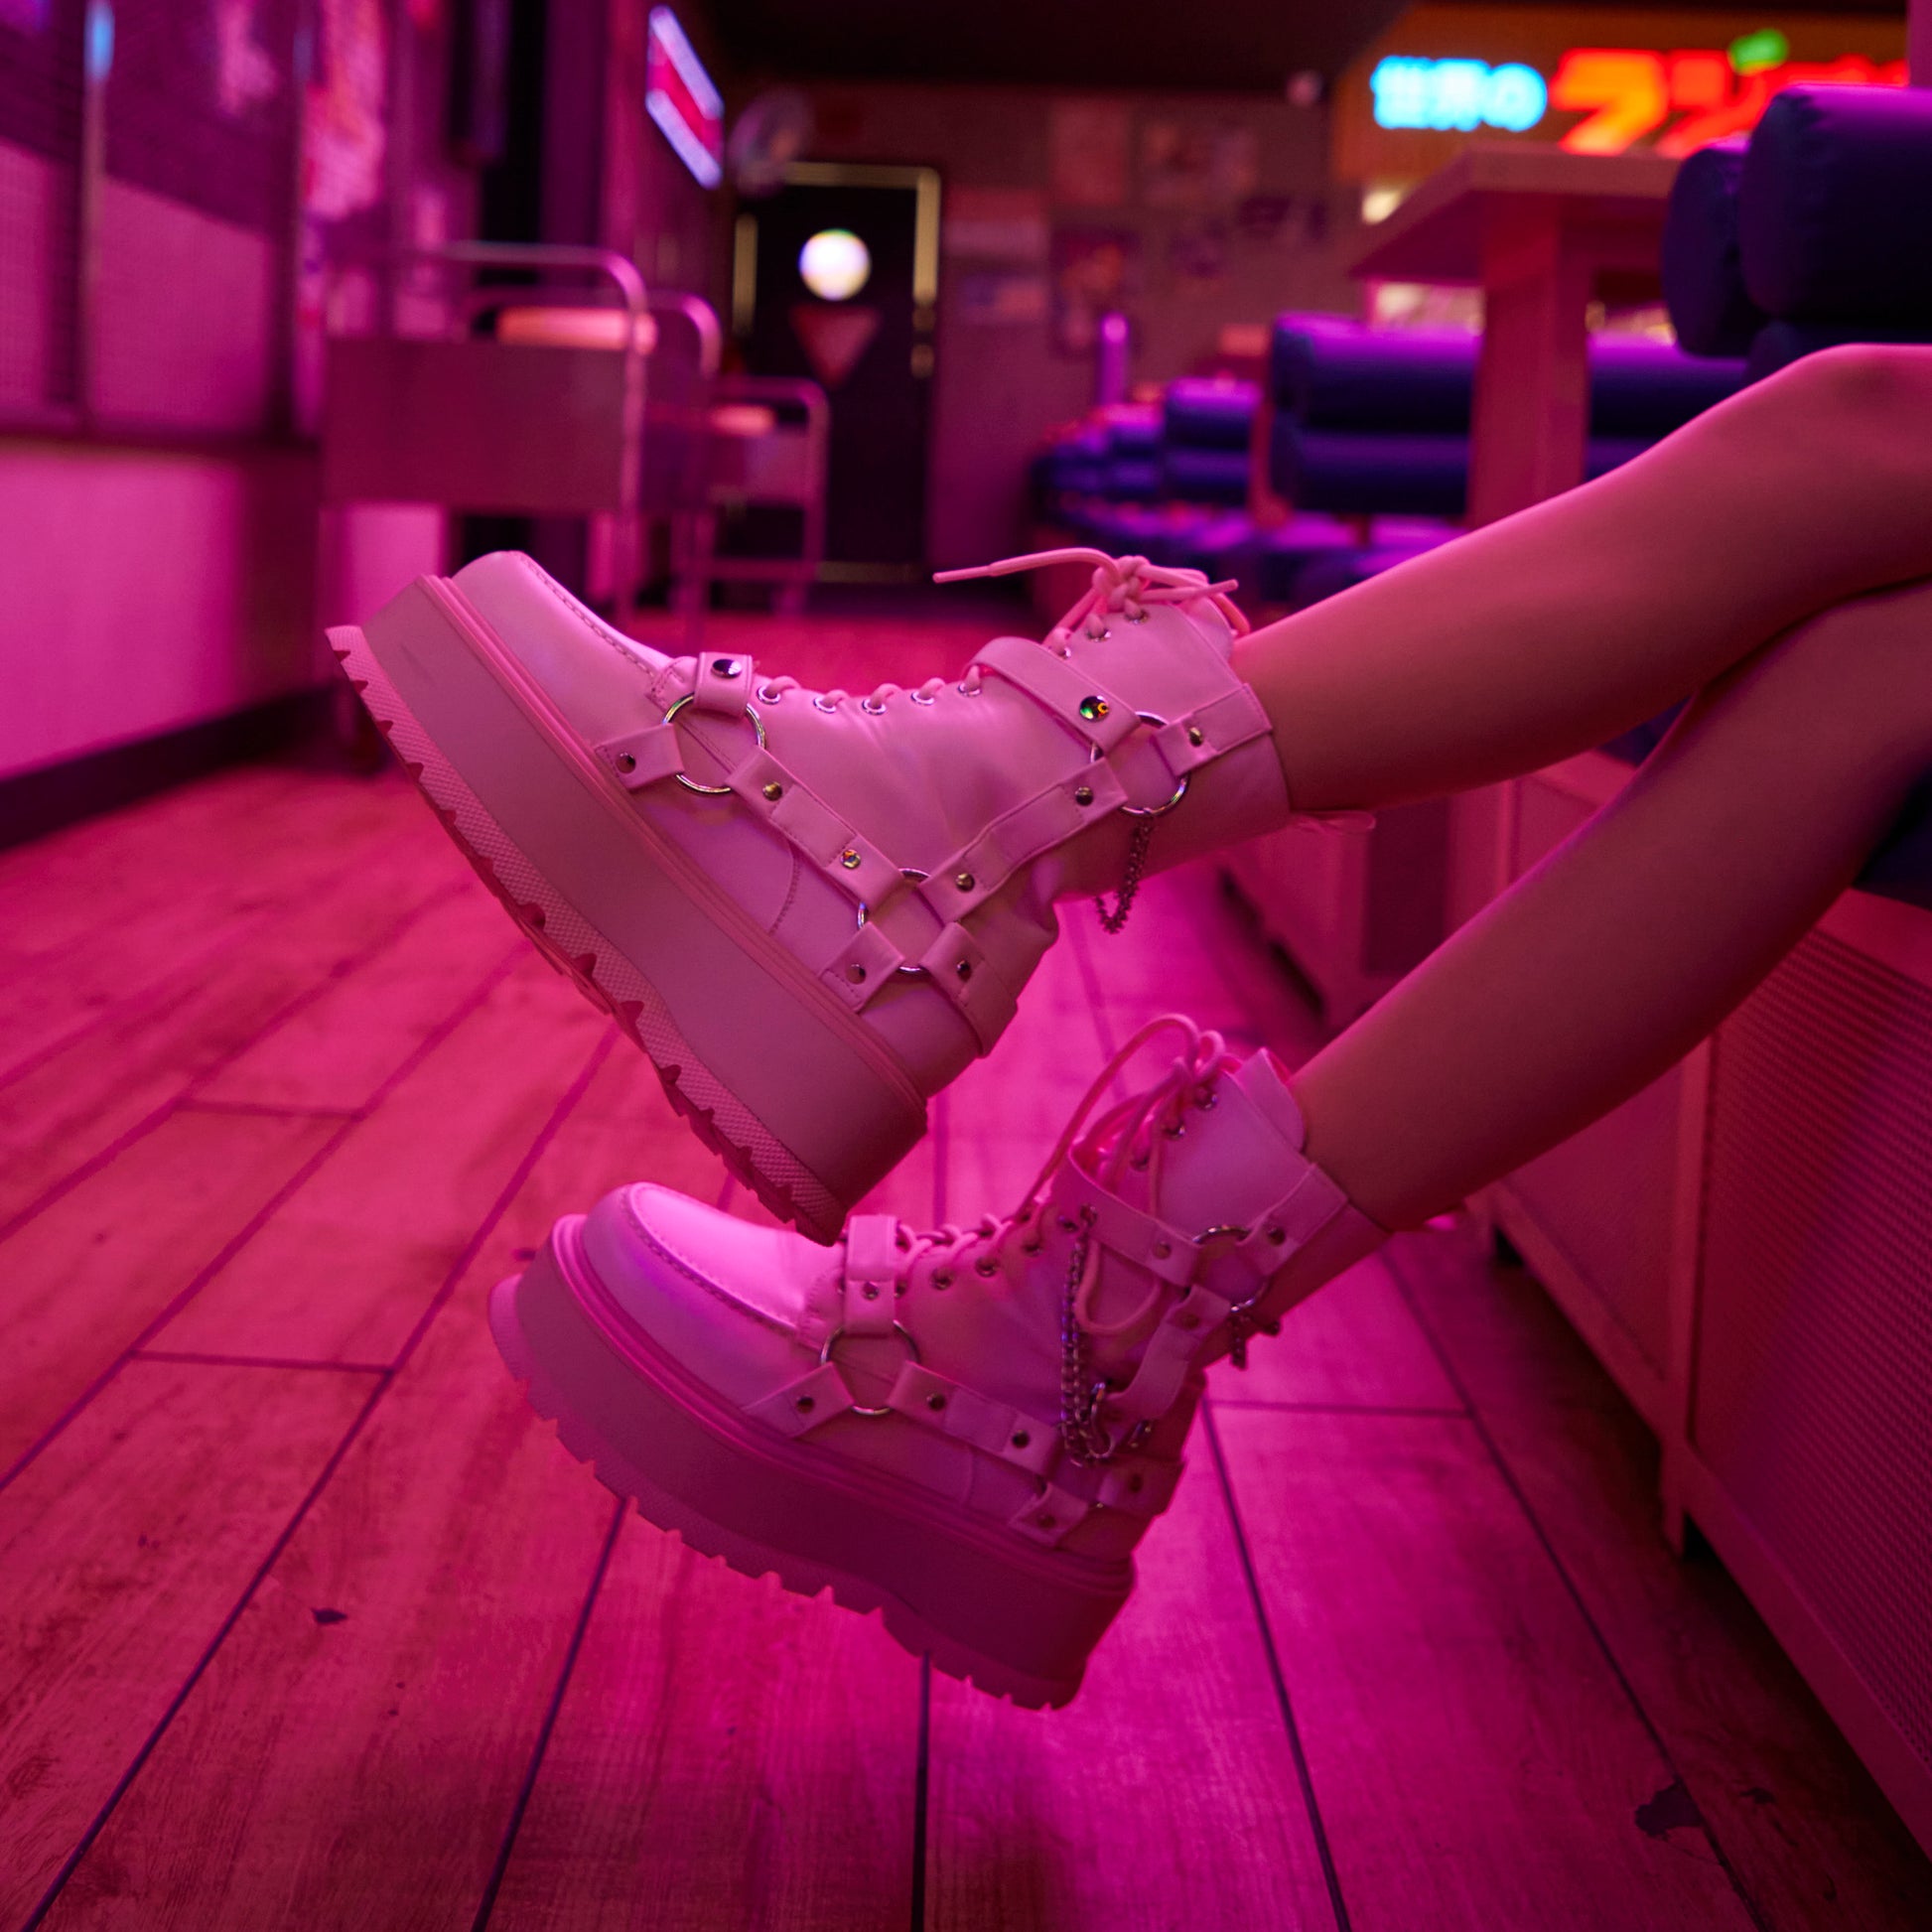 Yami Pastel Pink Platform Boots - Ankle Boots - KOI Footwear - Pink - Model Side View